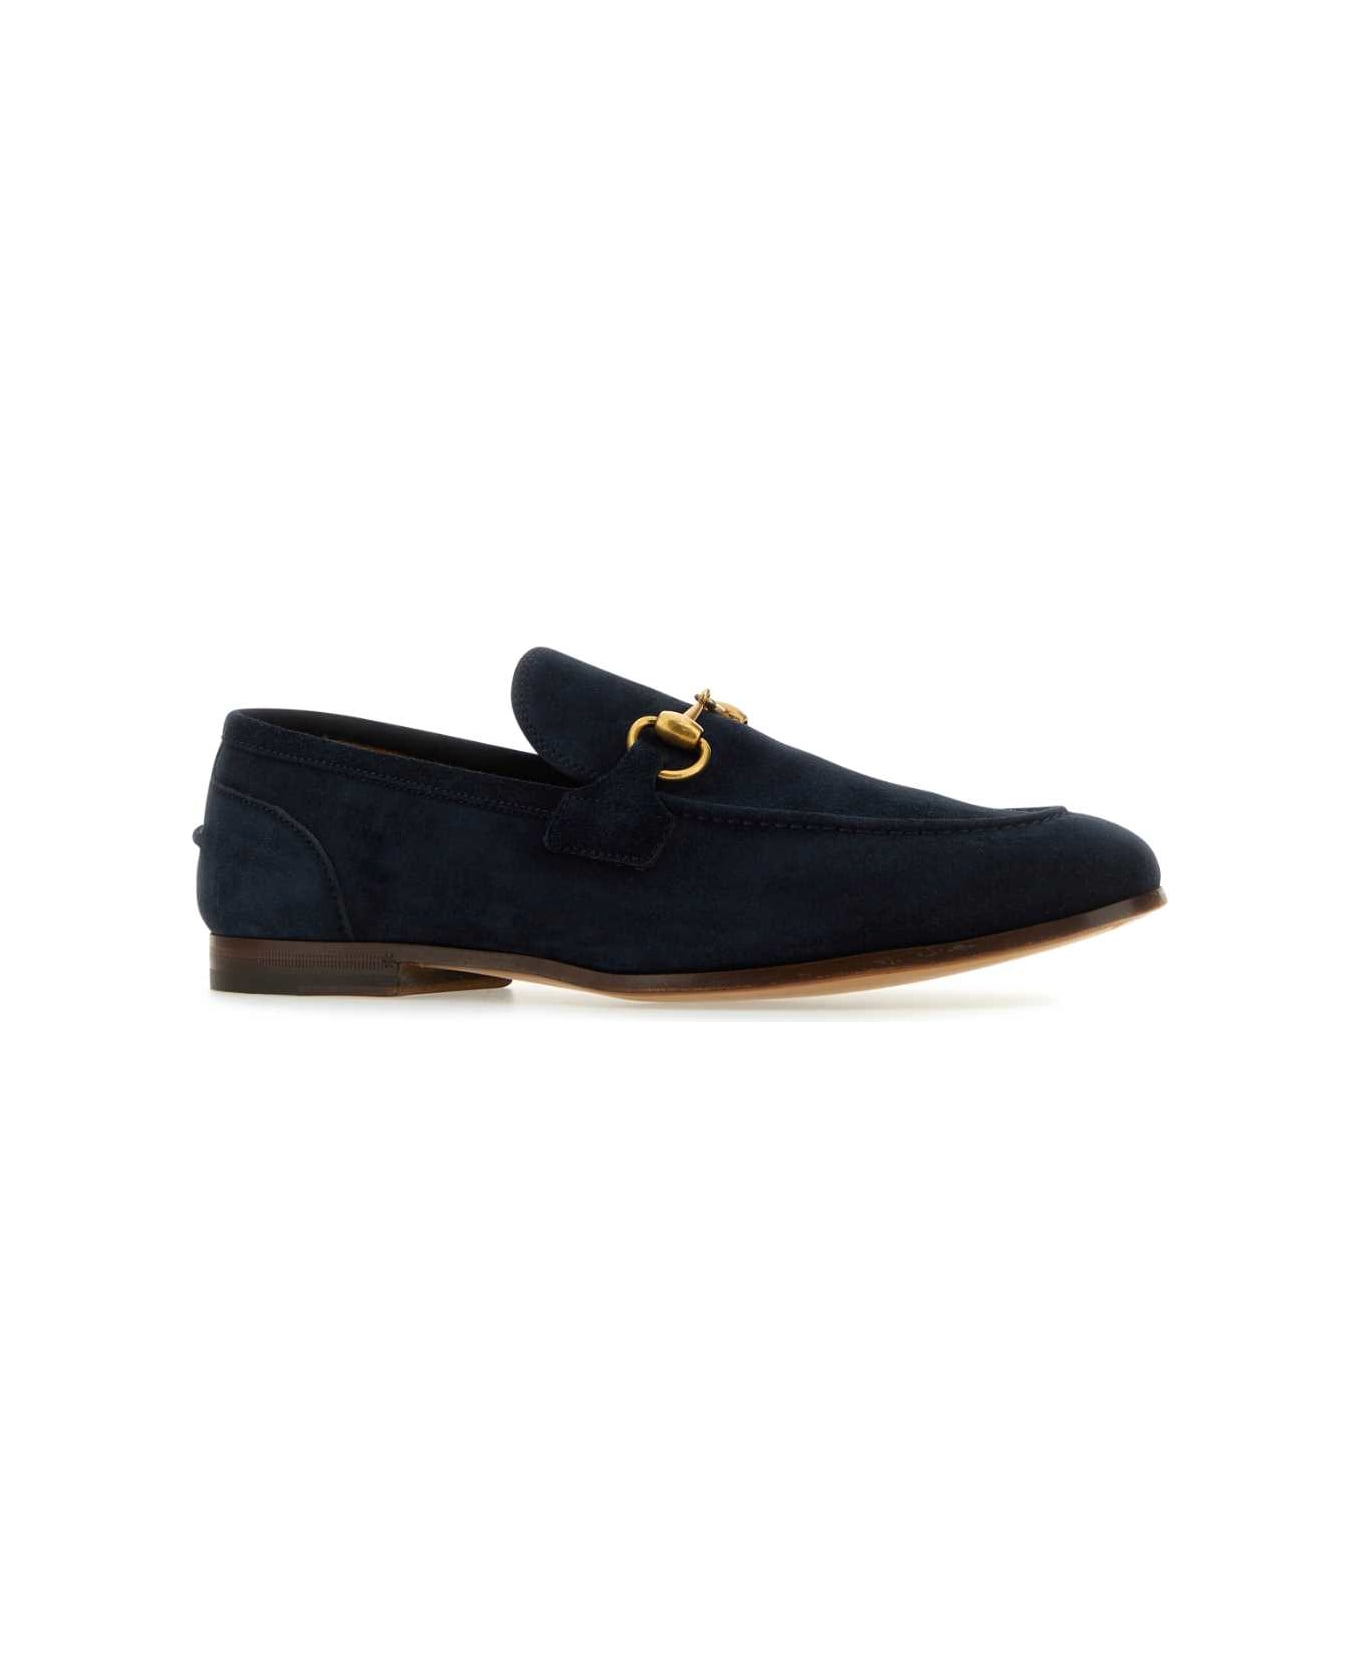 Gucci Navy Blue Suede Loafers - 4009